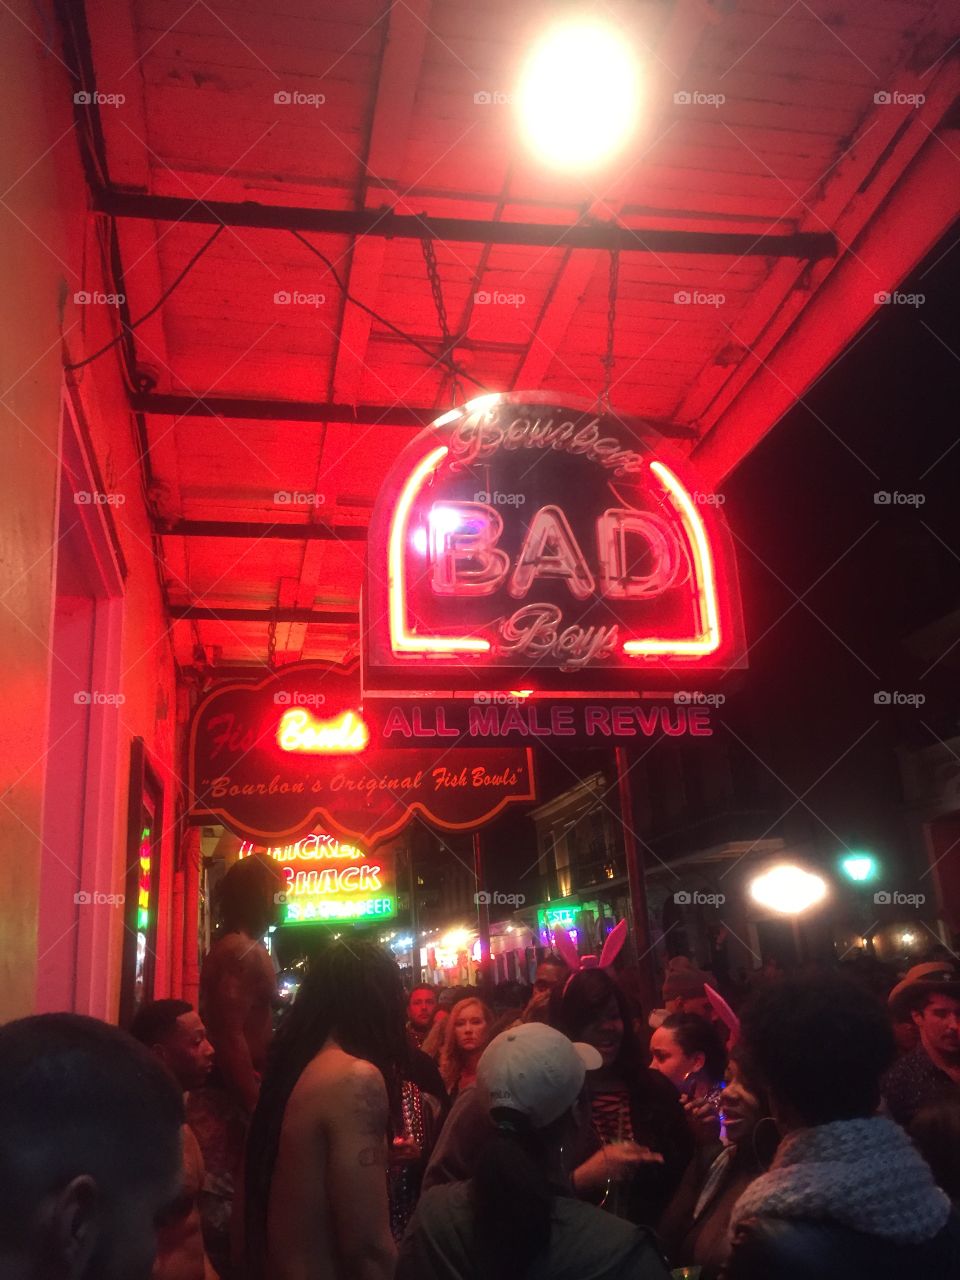 Neon sign in New Orleans 